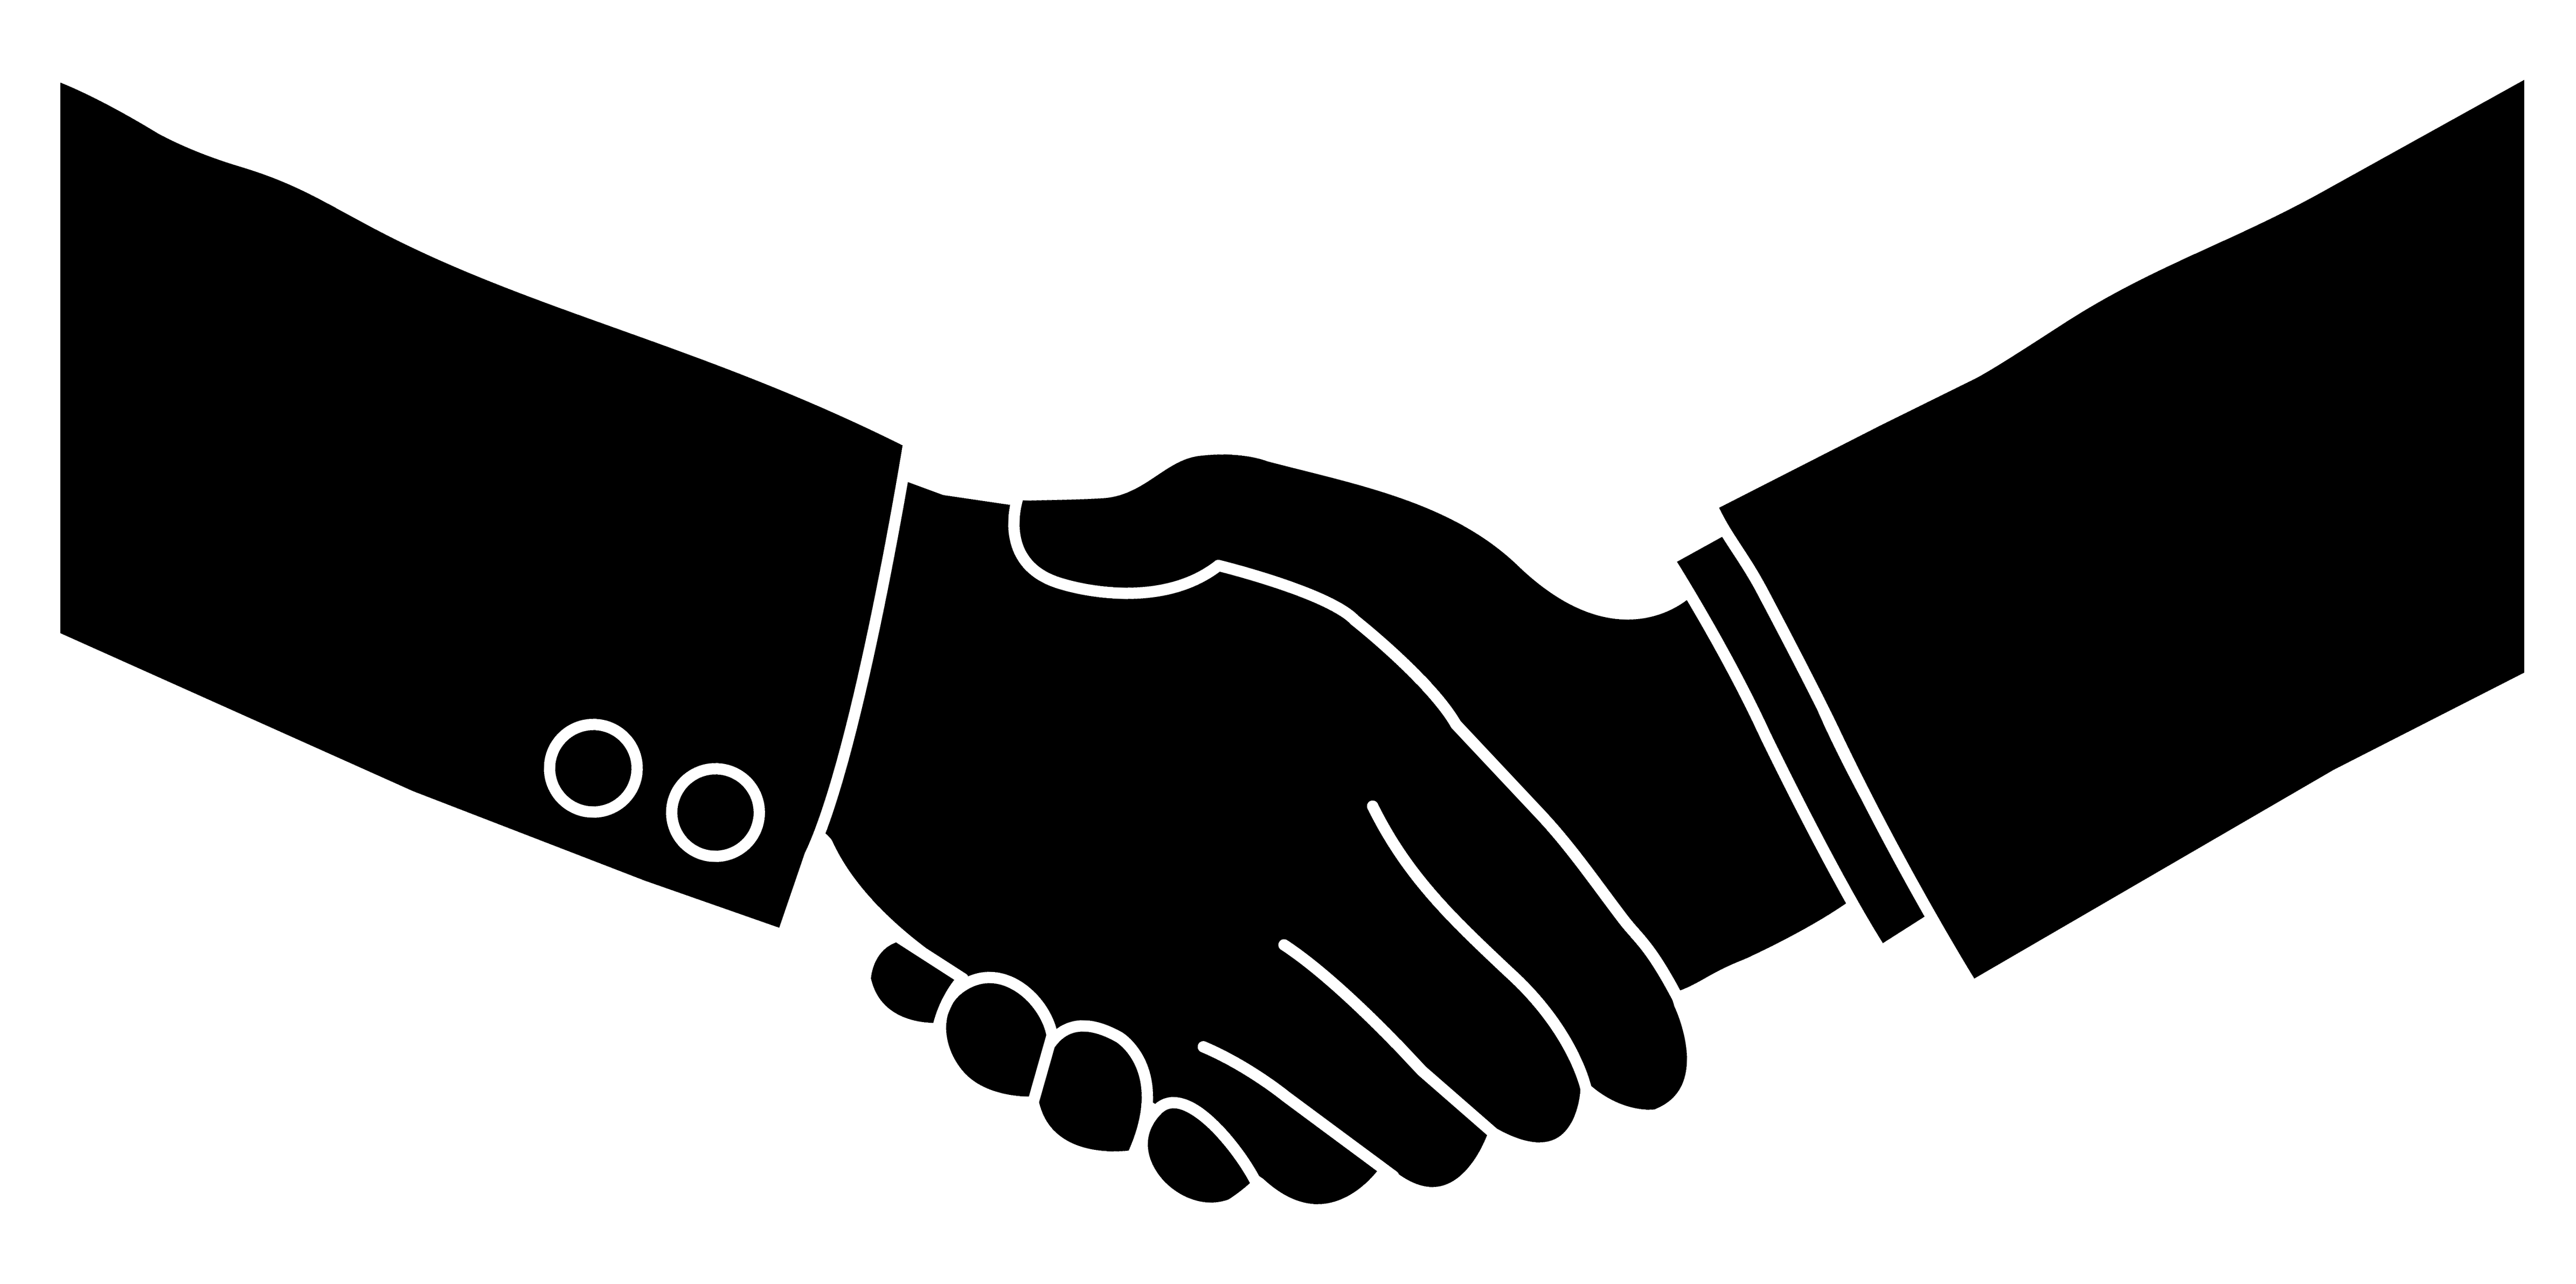 Shaking Hands Clip Art - Cliparts.co